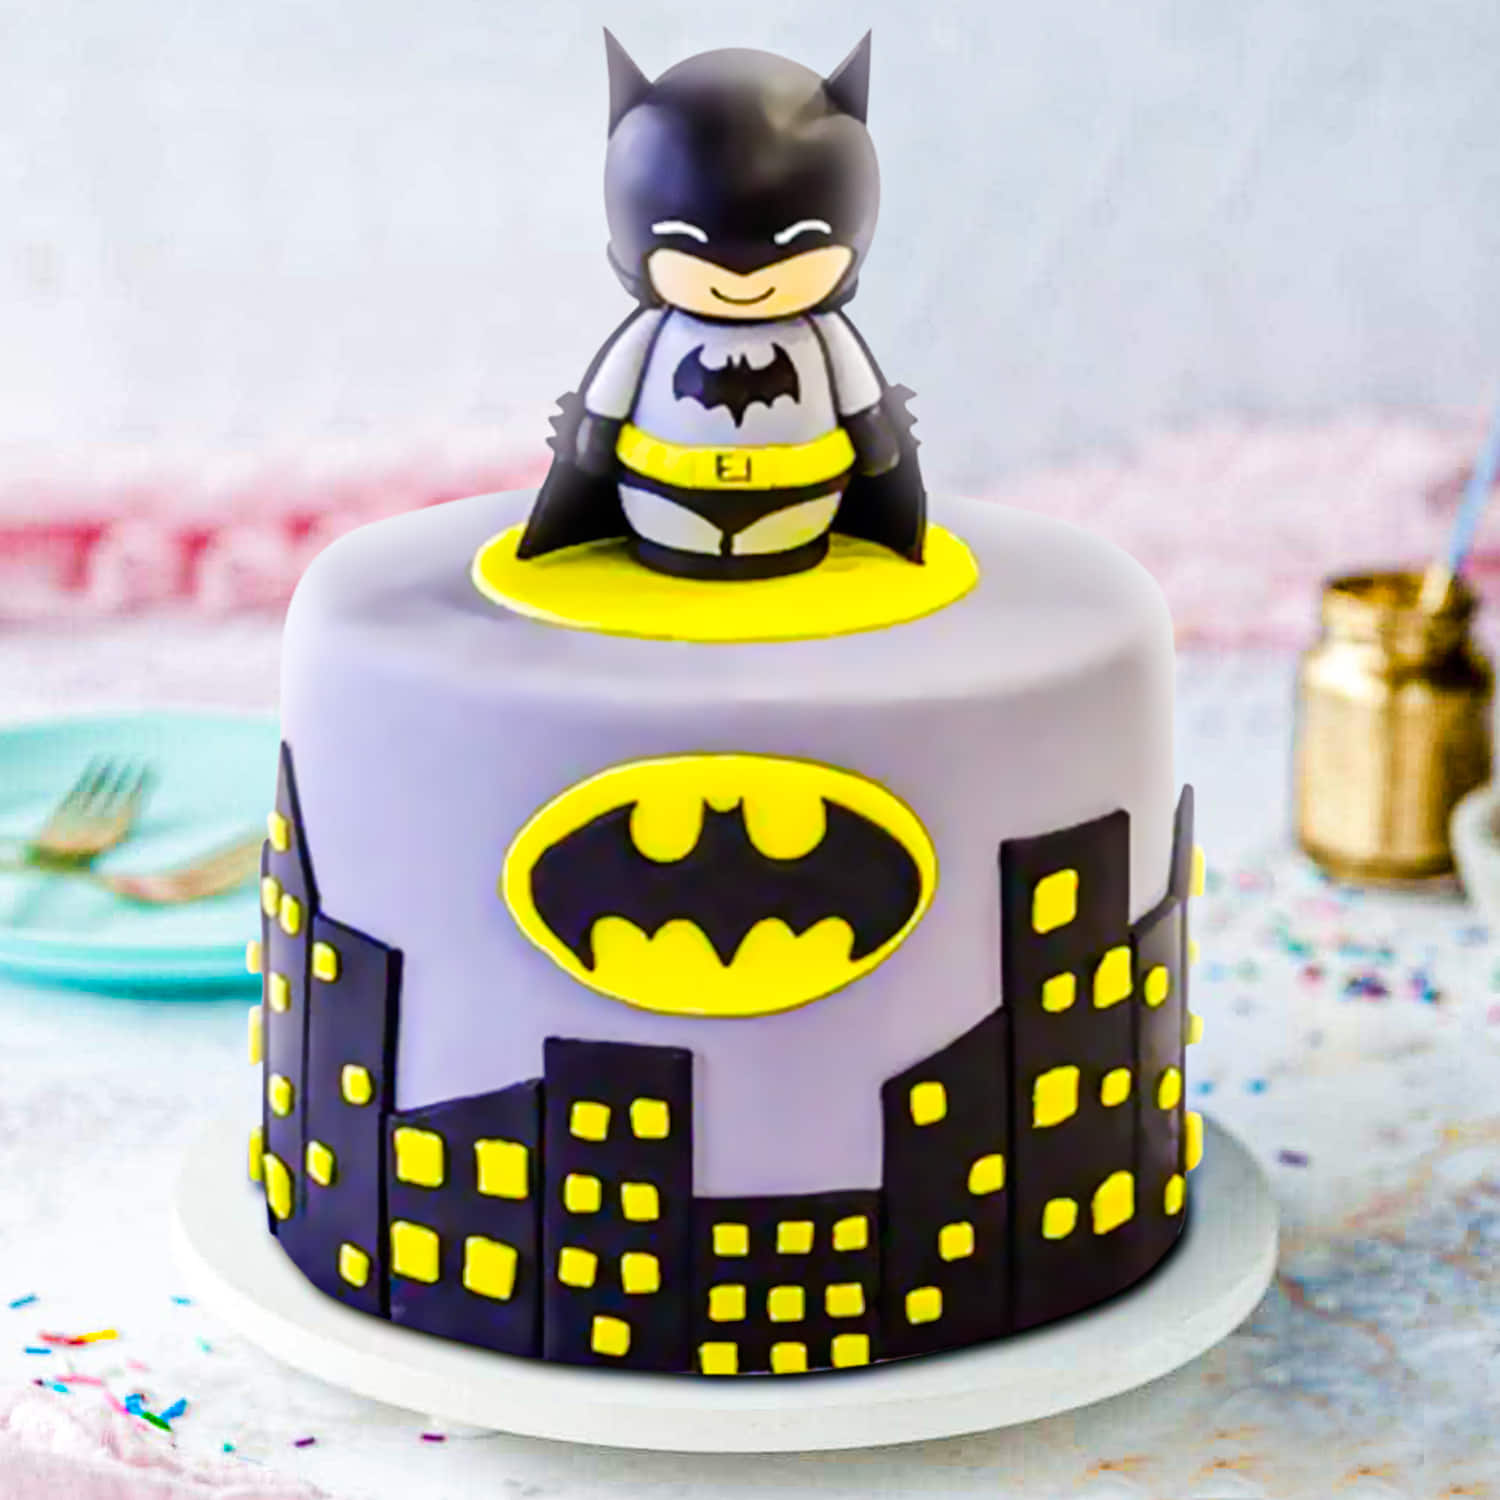 How to Make a Batman Cake: Step-By-Step Tutorial with Images